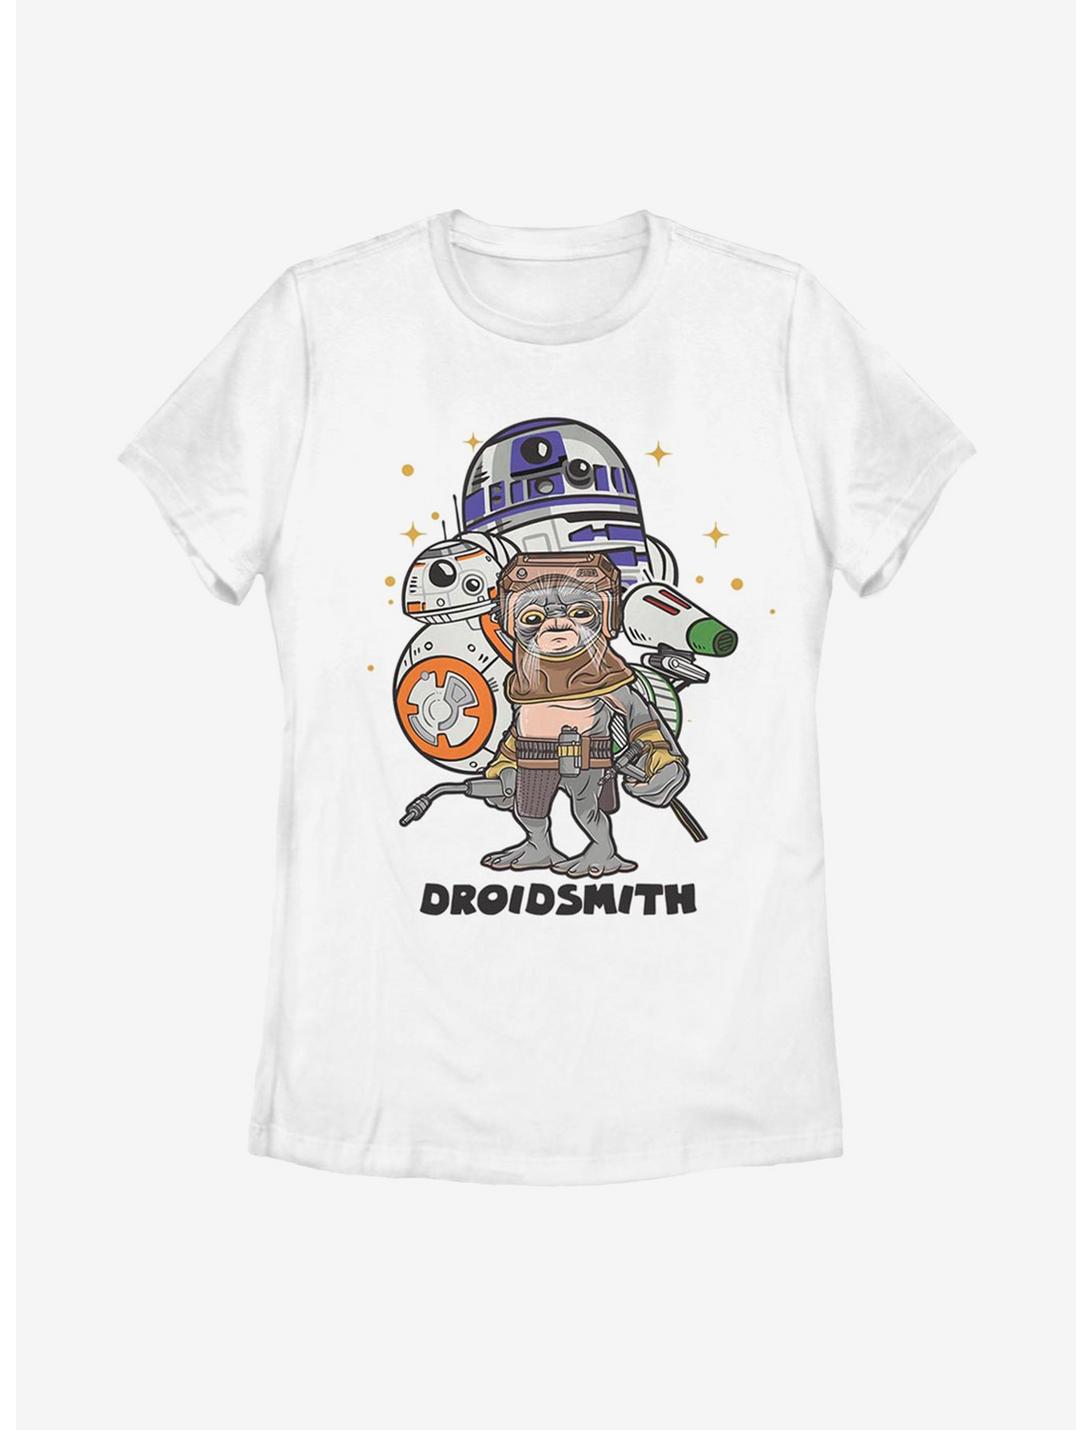 Star Wars Episode IX The Rise Of Skywalker Droid Smith Womens T-Shirt, WHITE, hi-res